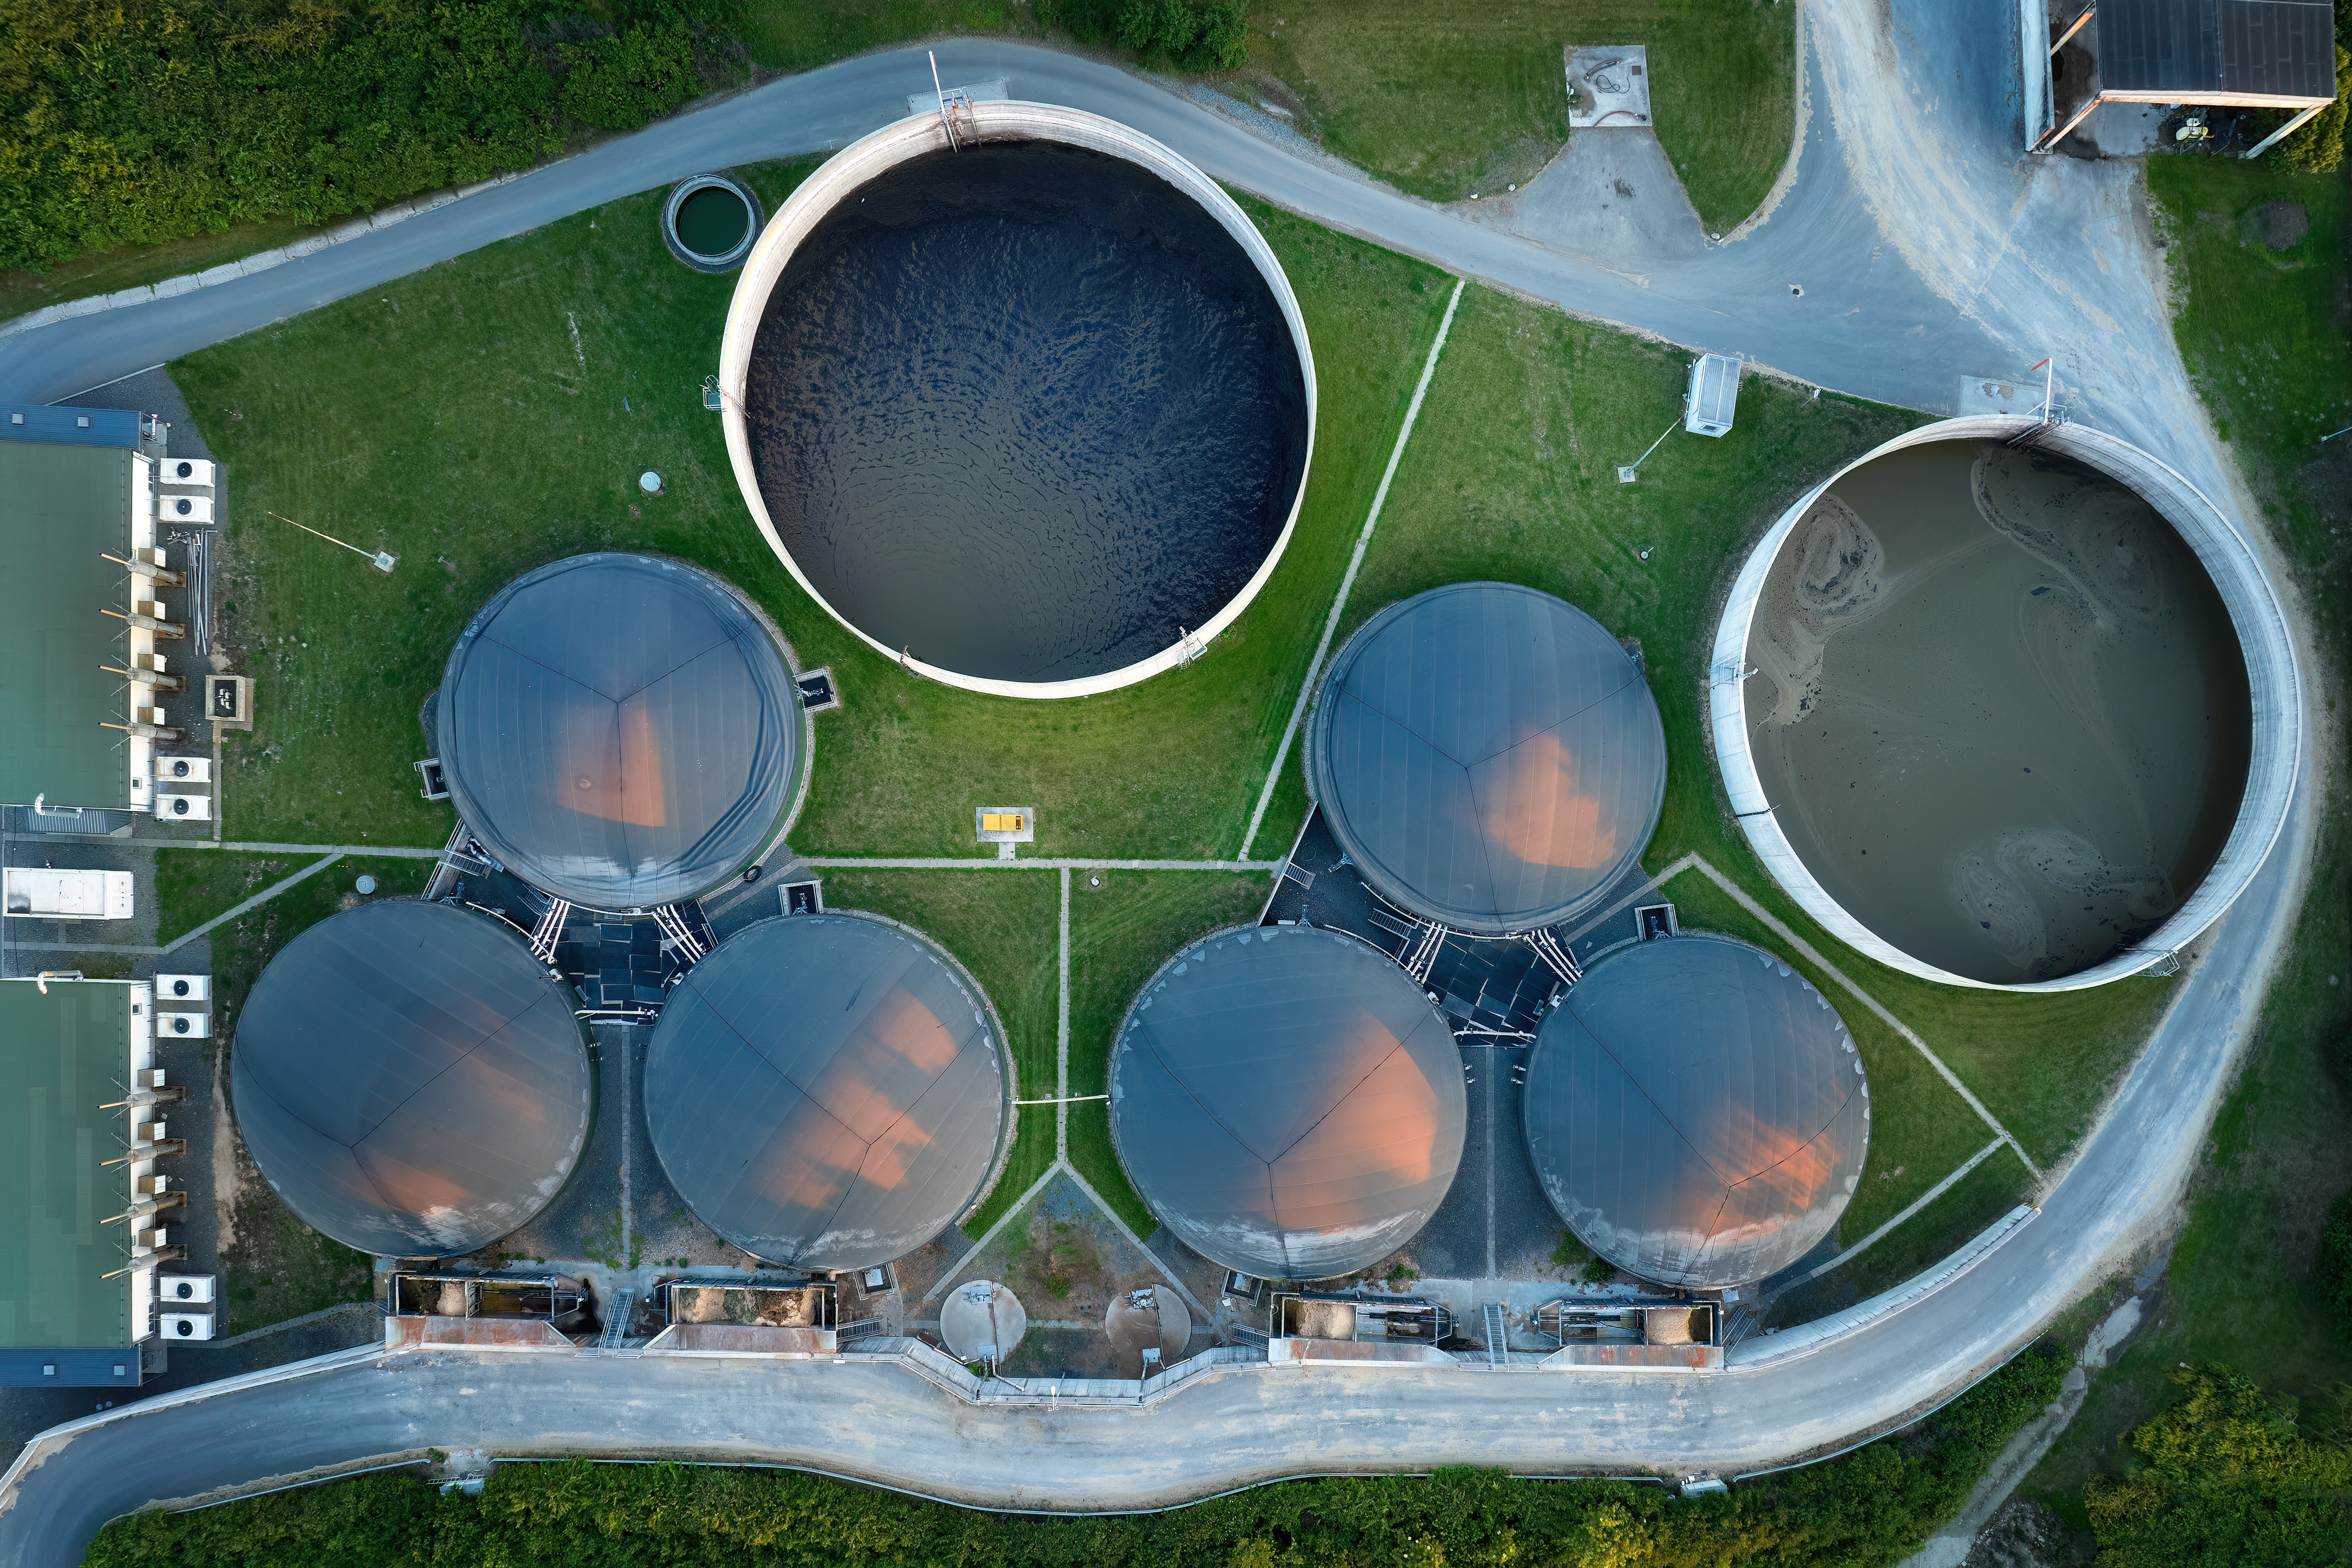 Biogas storage tanks of an agricultural biogas plant